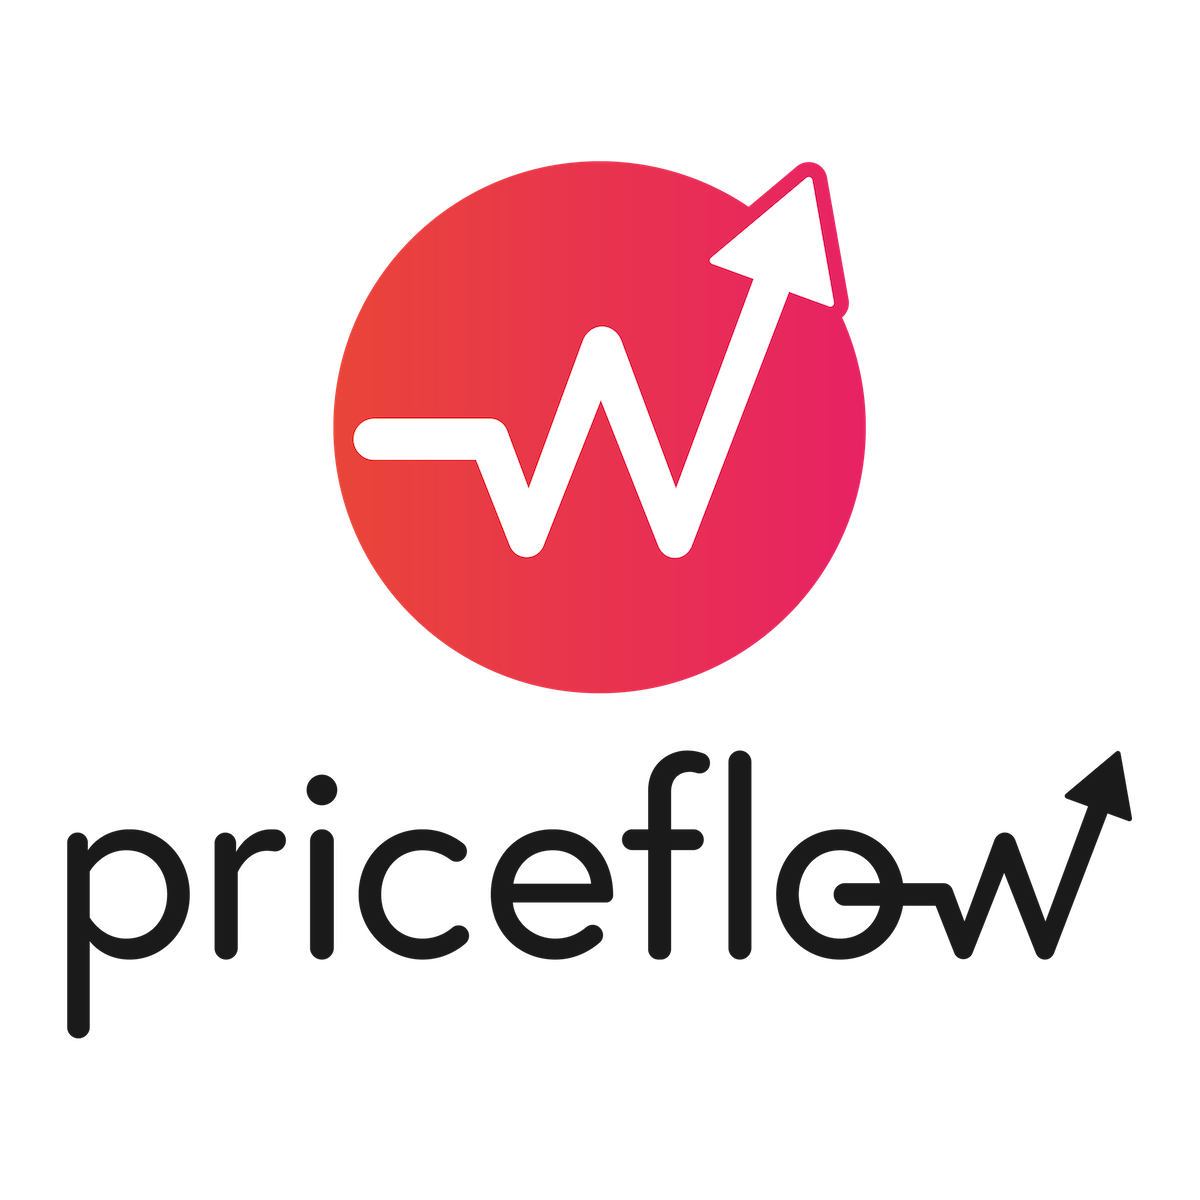 Priceflow for Shopify